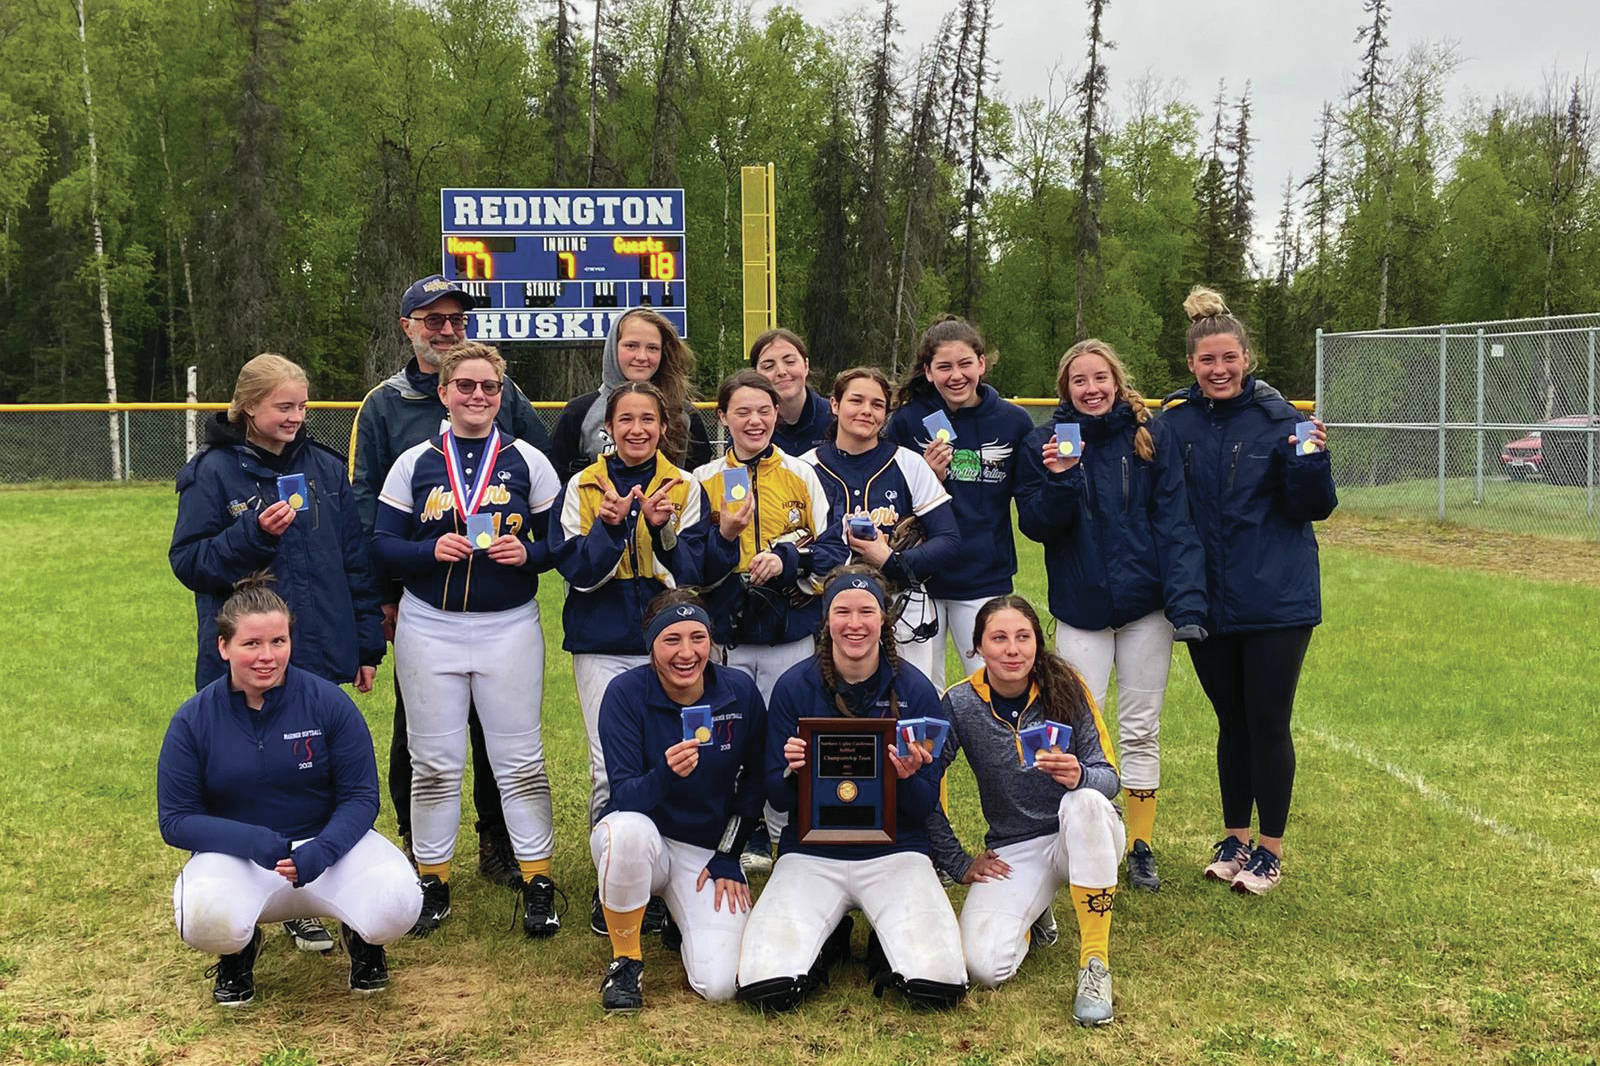 The Homer Mariner softball team celebrates after winning the Northern Lights Conference in an 18-17 win over Kodiak. At far left, back, is Coach Bill Bell, and at far right is Assistant coach Mary Hana Bowe. (Photo courtesy Homer Mariner Softball team)